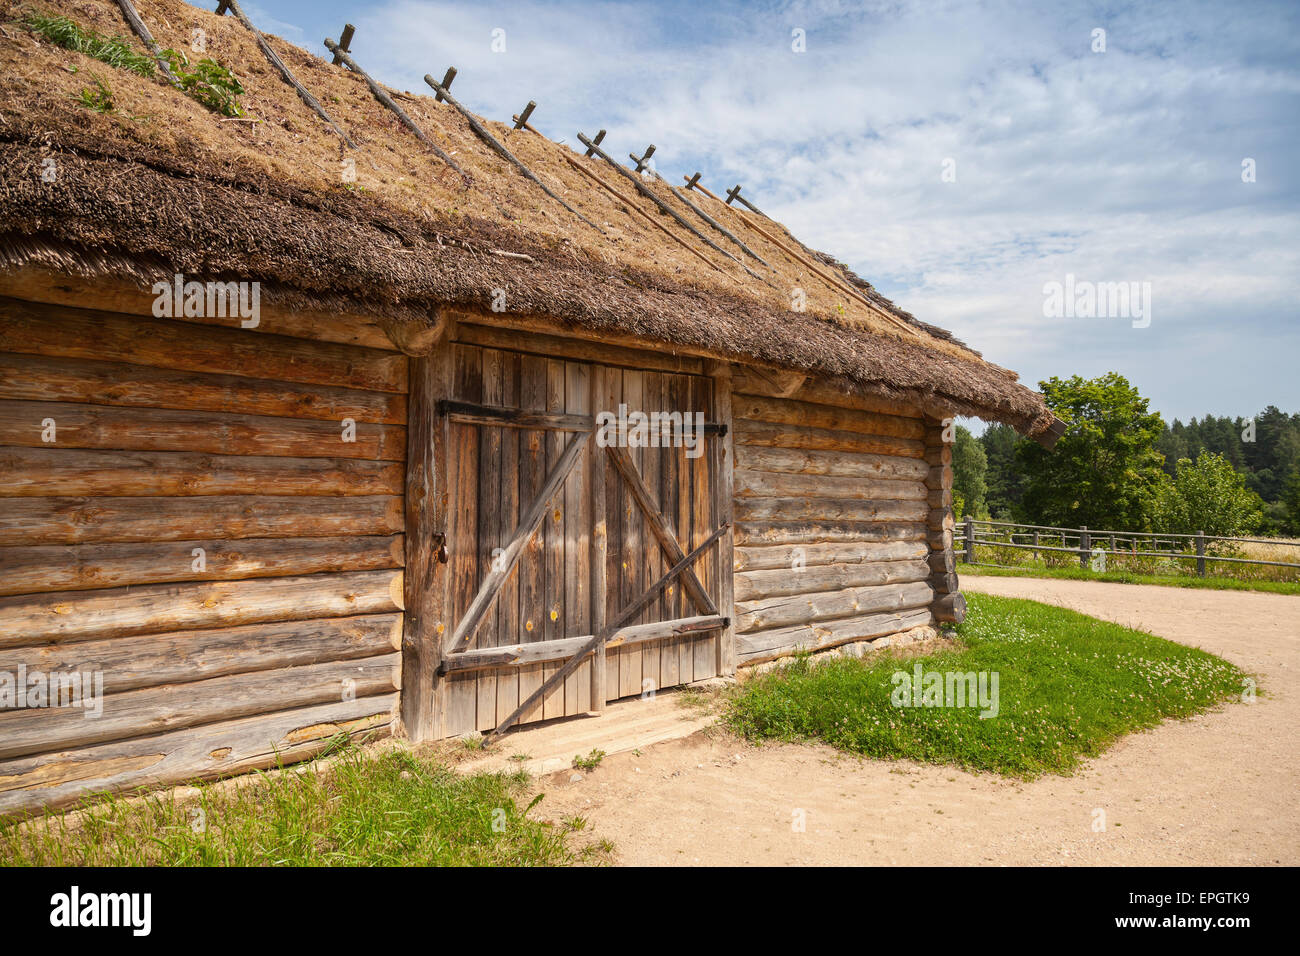 Russian rural wooden architecture example, old barn with locked gate Stock Photo